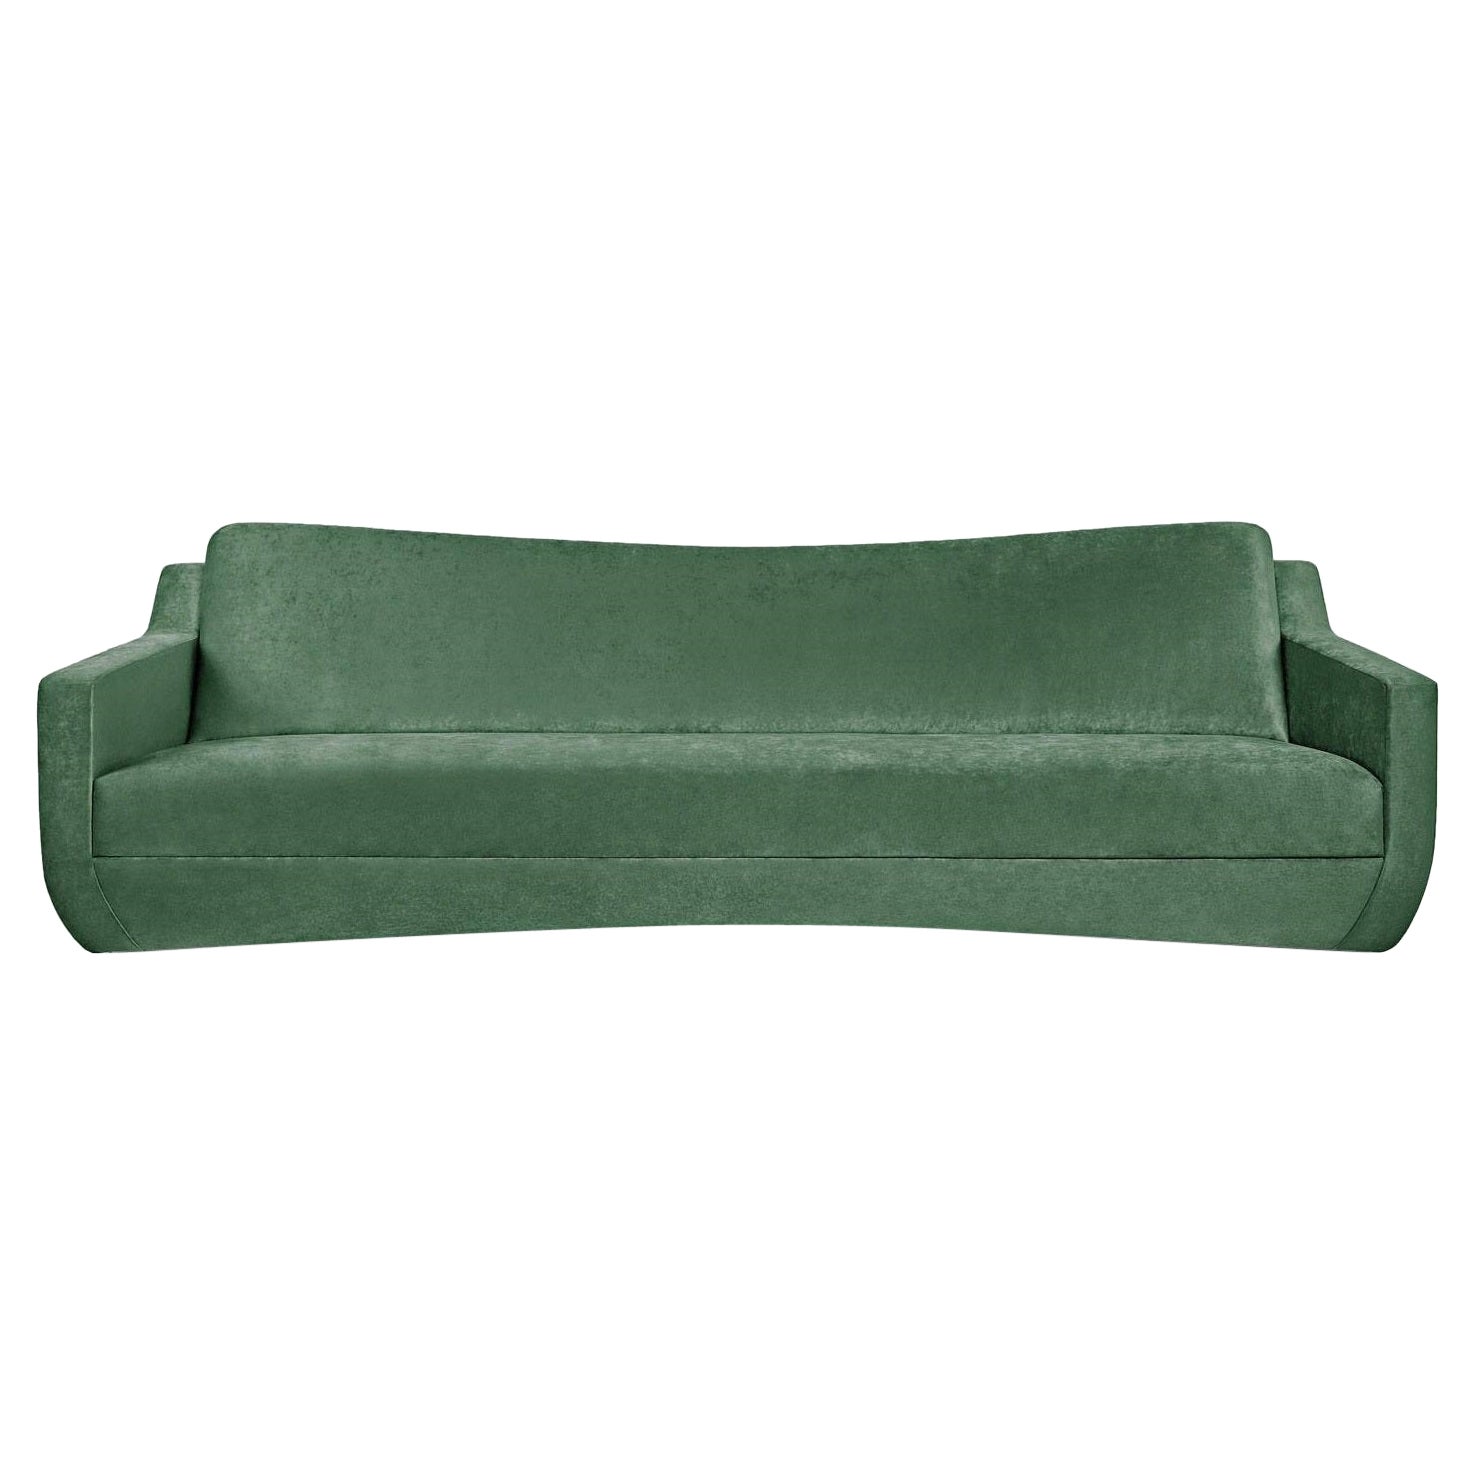 Contemporary Sculptural Sofa with Discreet Seaming For Sale